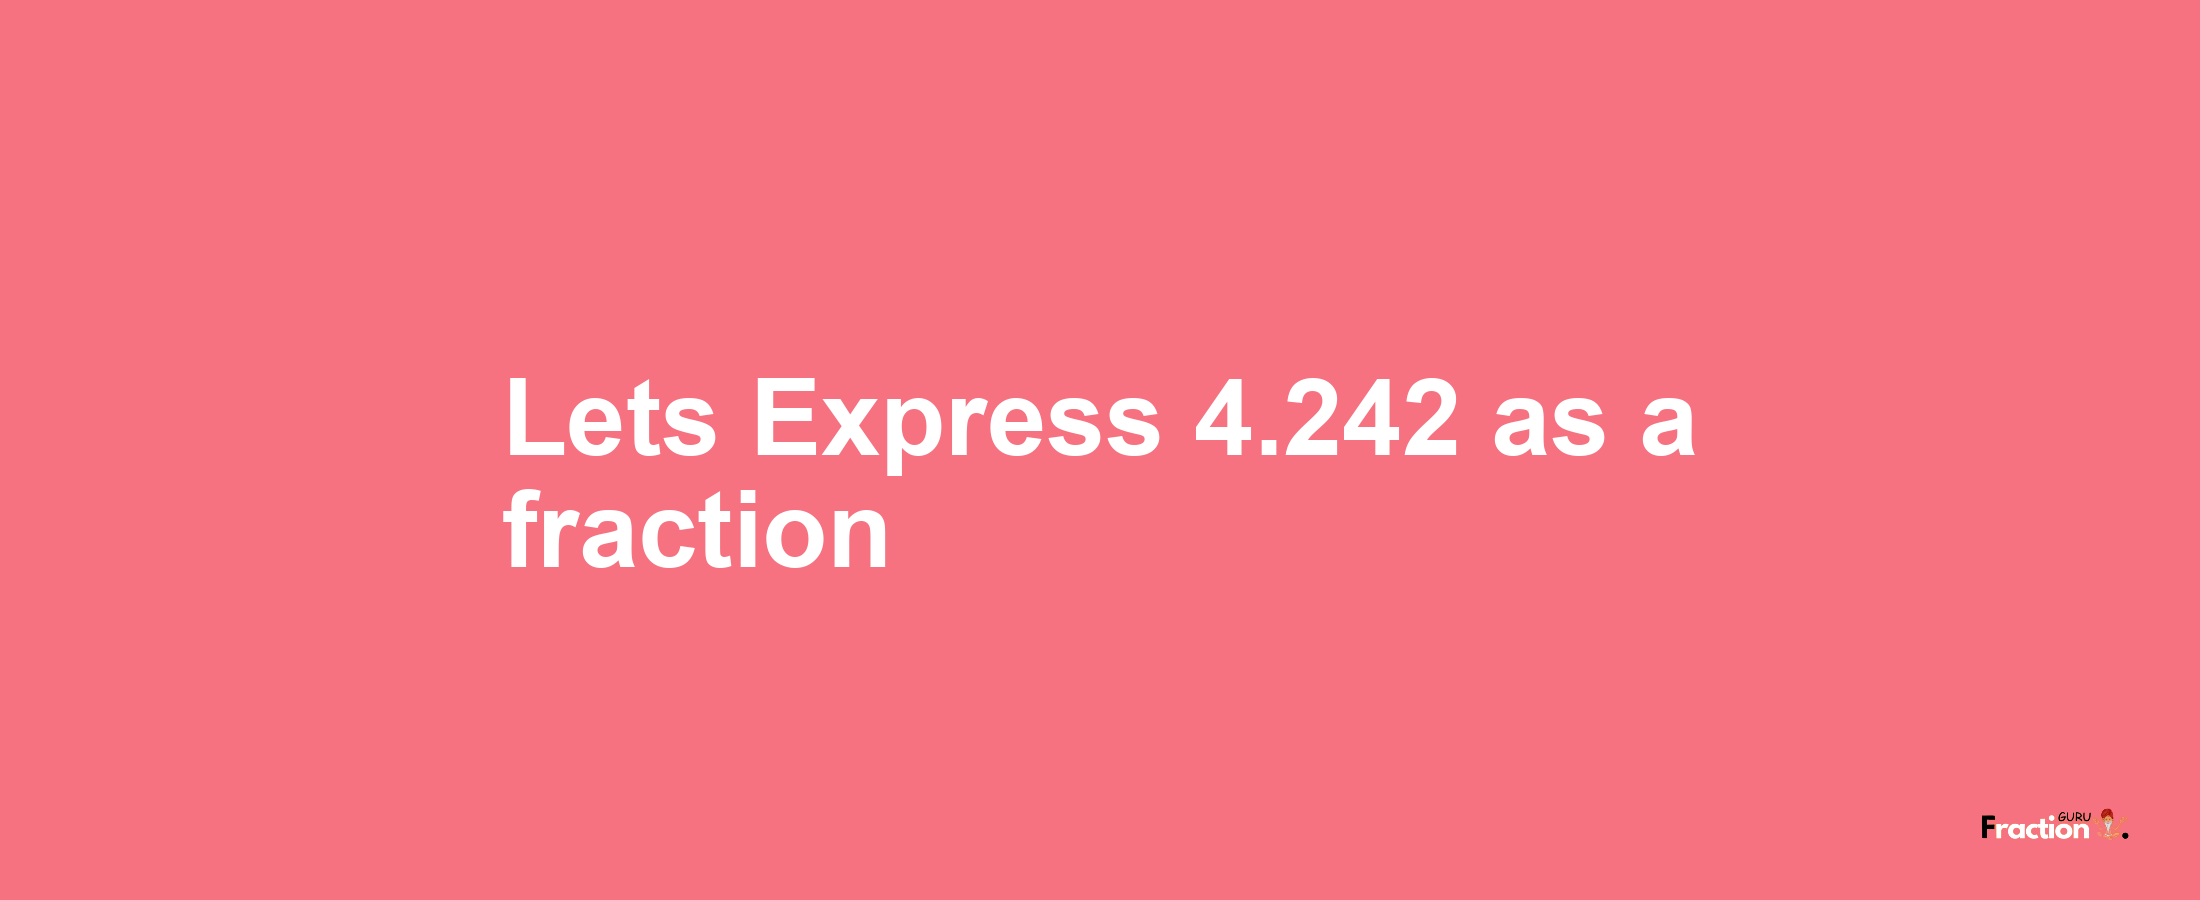 Lets Express 4.242 as afraction